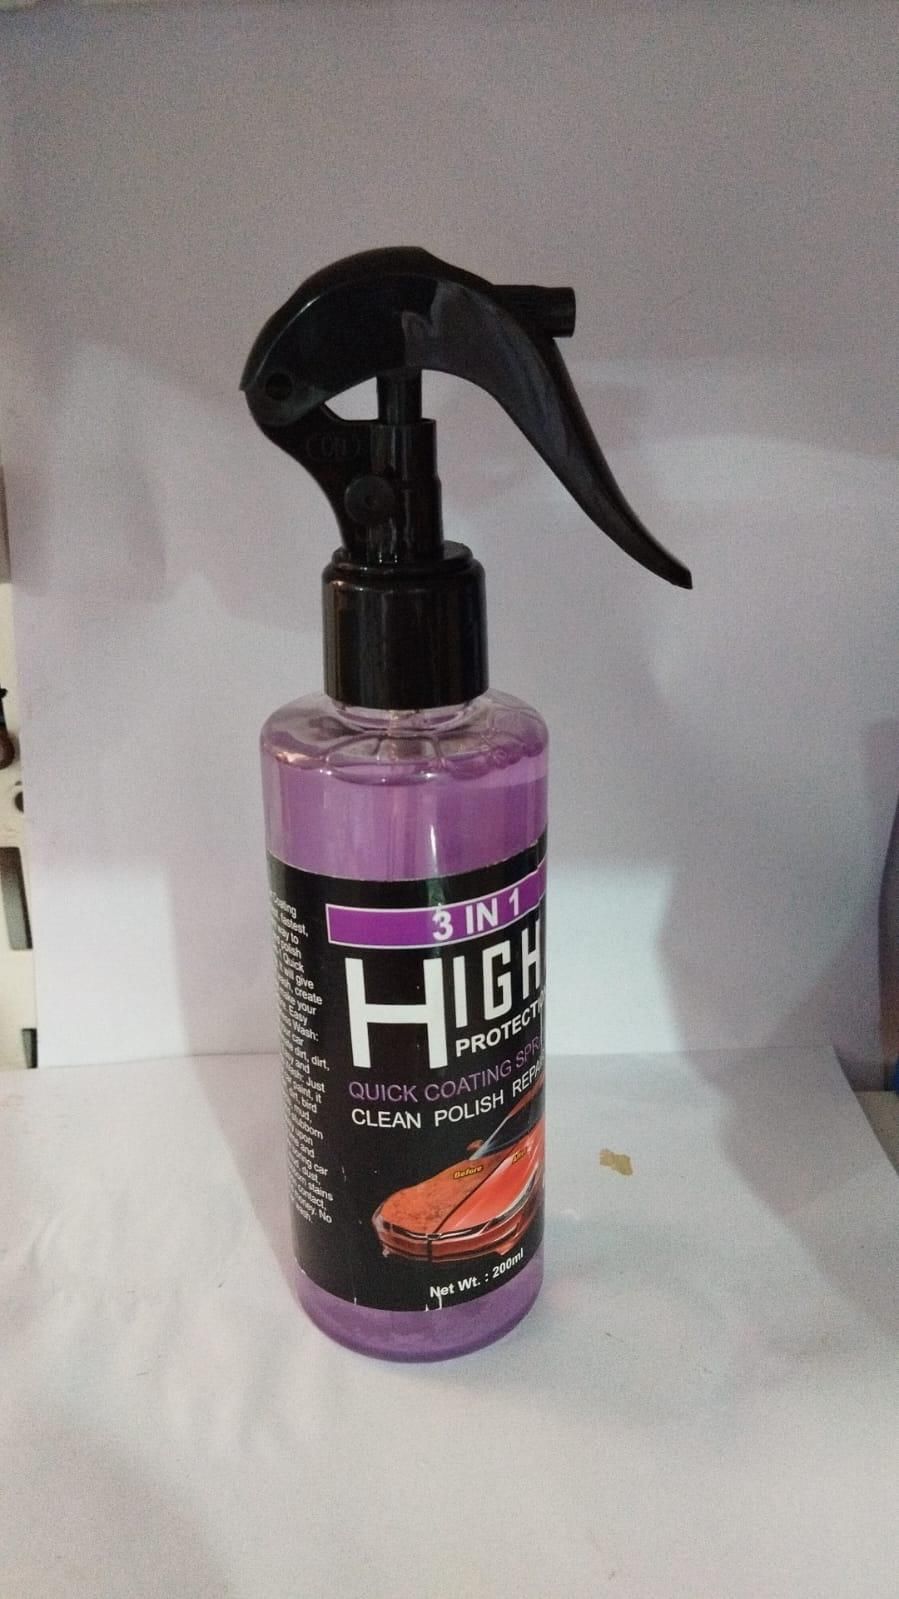 3-IN-1 HIGH PROTECTION CAR COATING SPRAY | BUY 1 GET 1 FREE